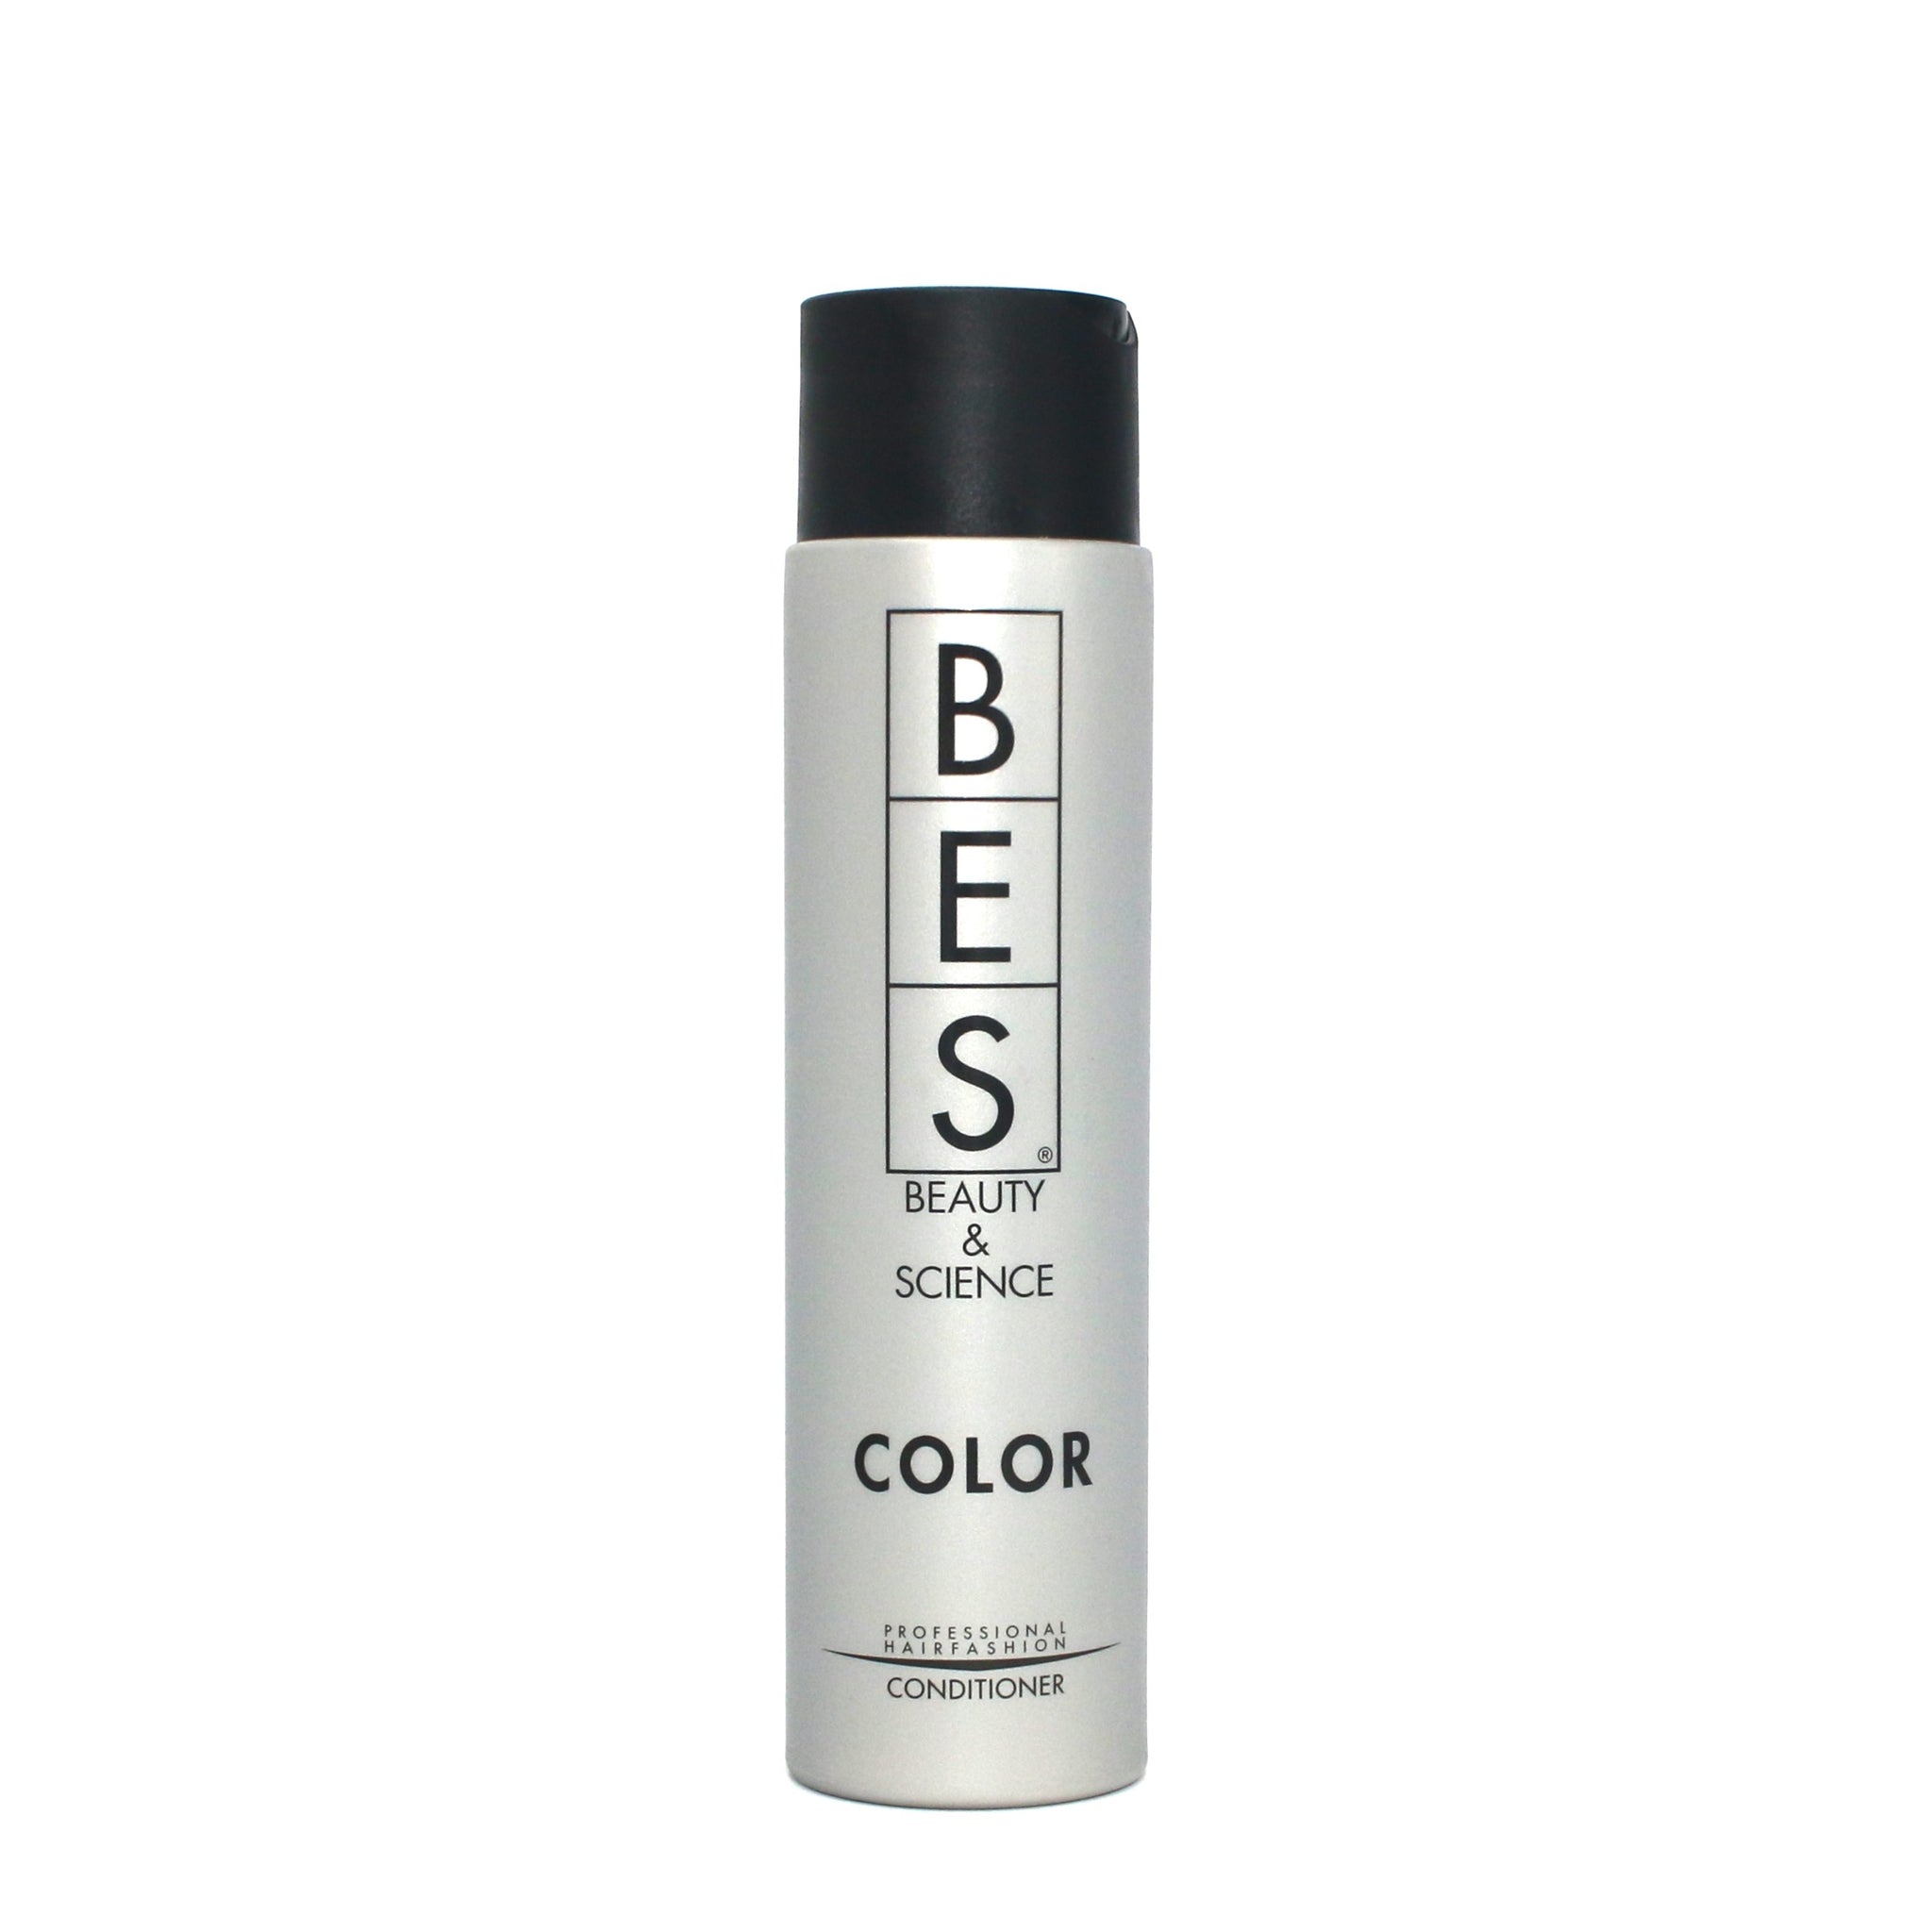 BES Beauty & Science Color Conditioner 10.5 oz